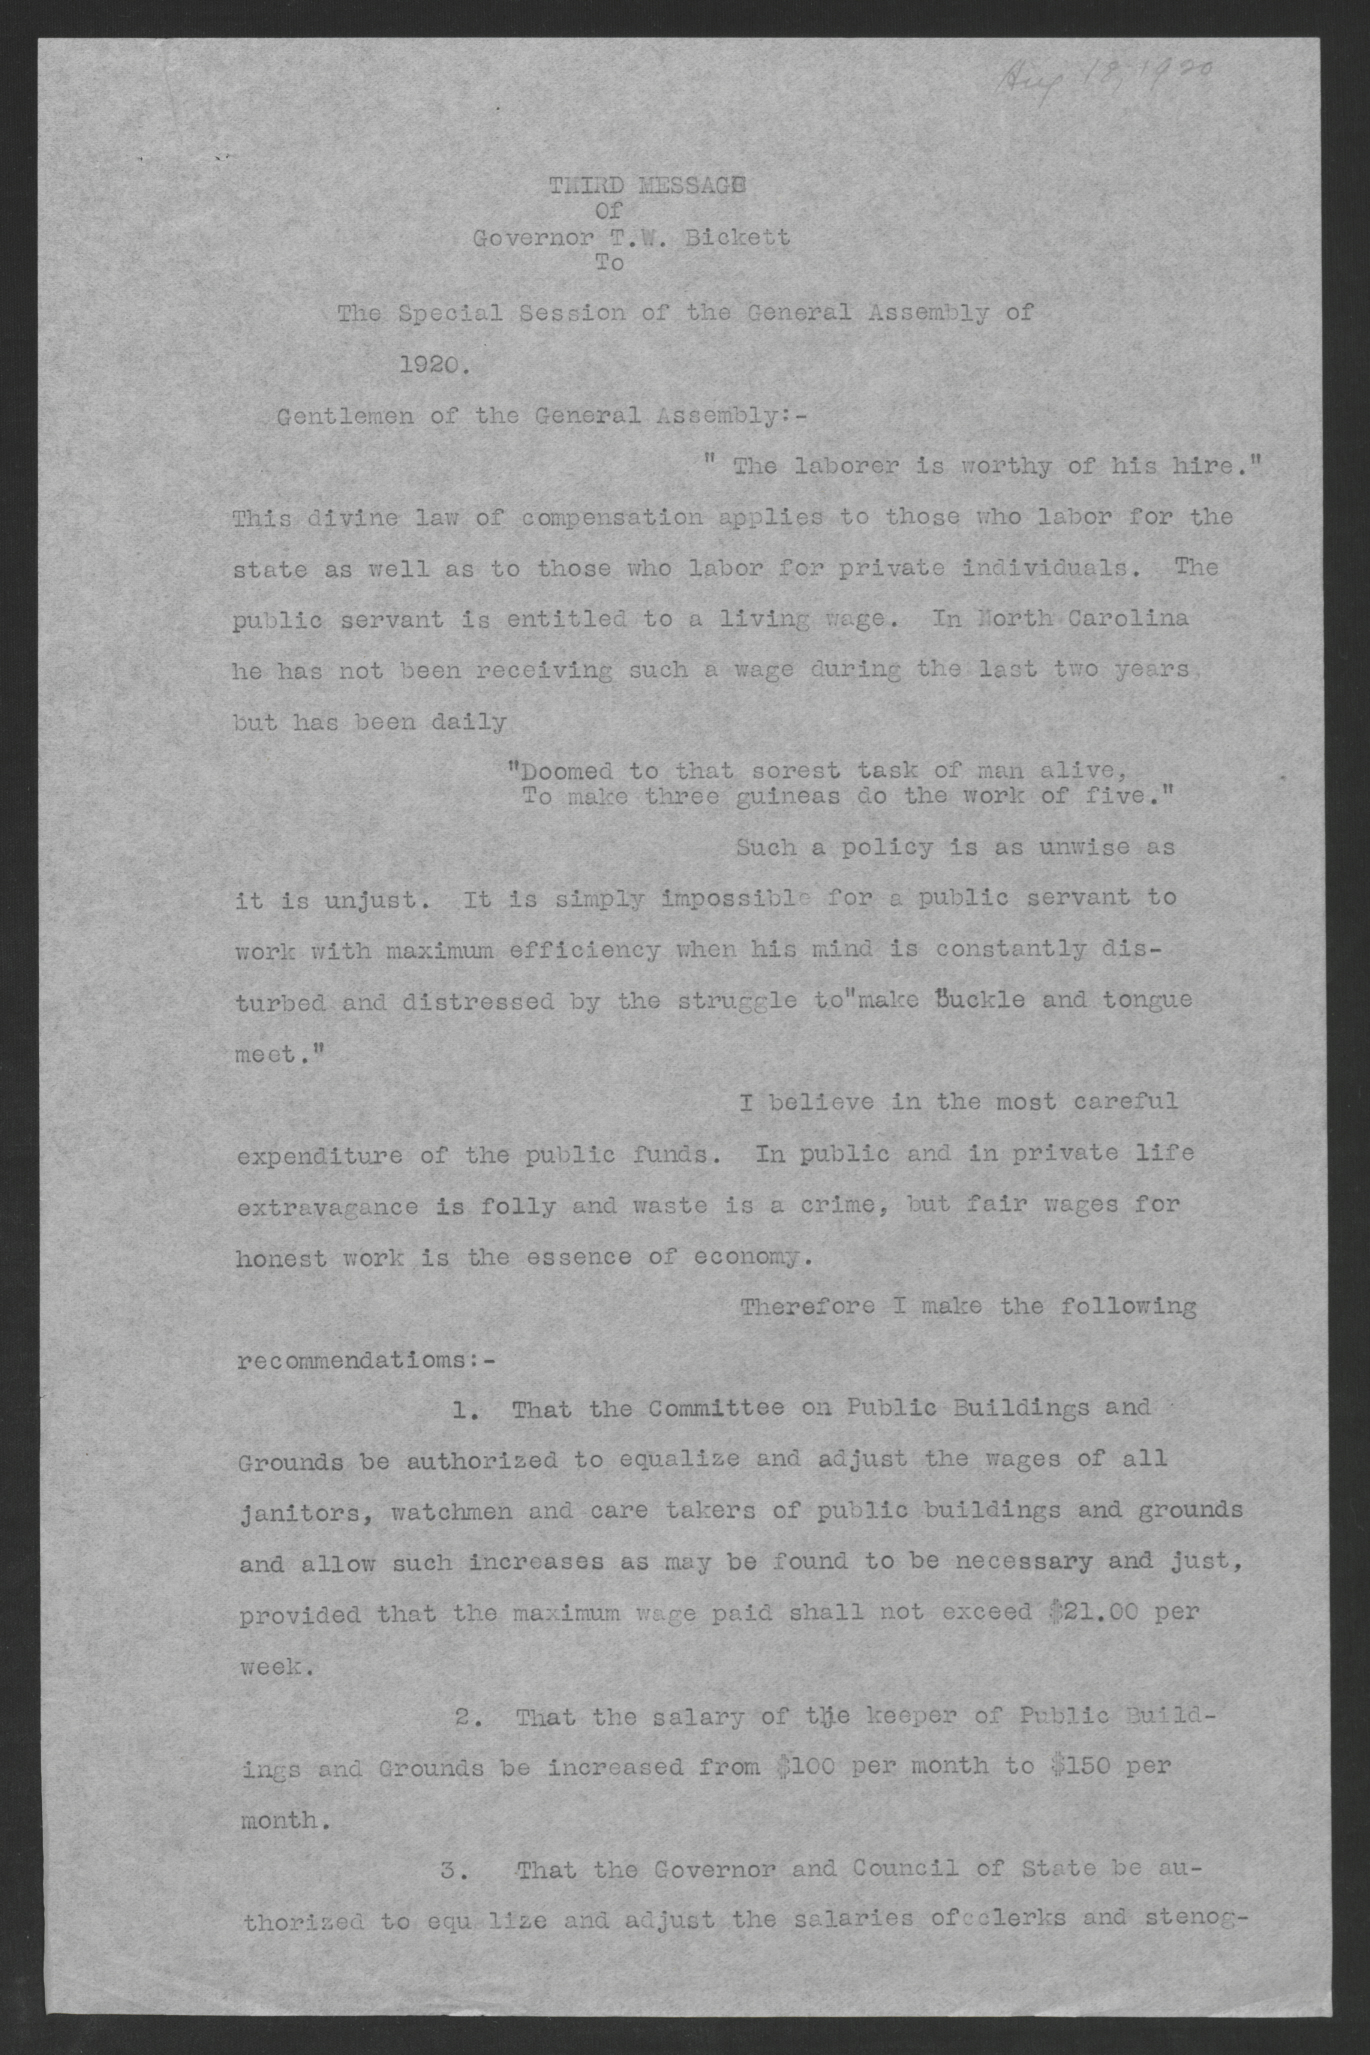 Third Message of Governor Thomas W. Bickett to the Special Session of the General Assembly of 1920, August 18, 1920, page 1